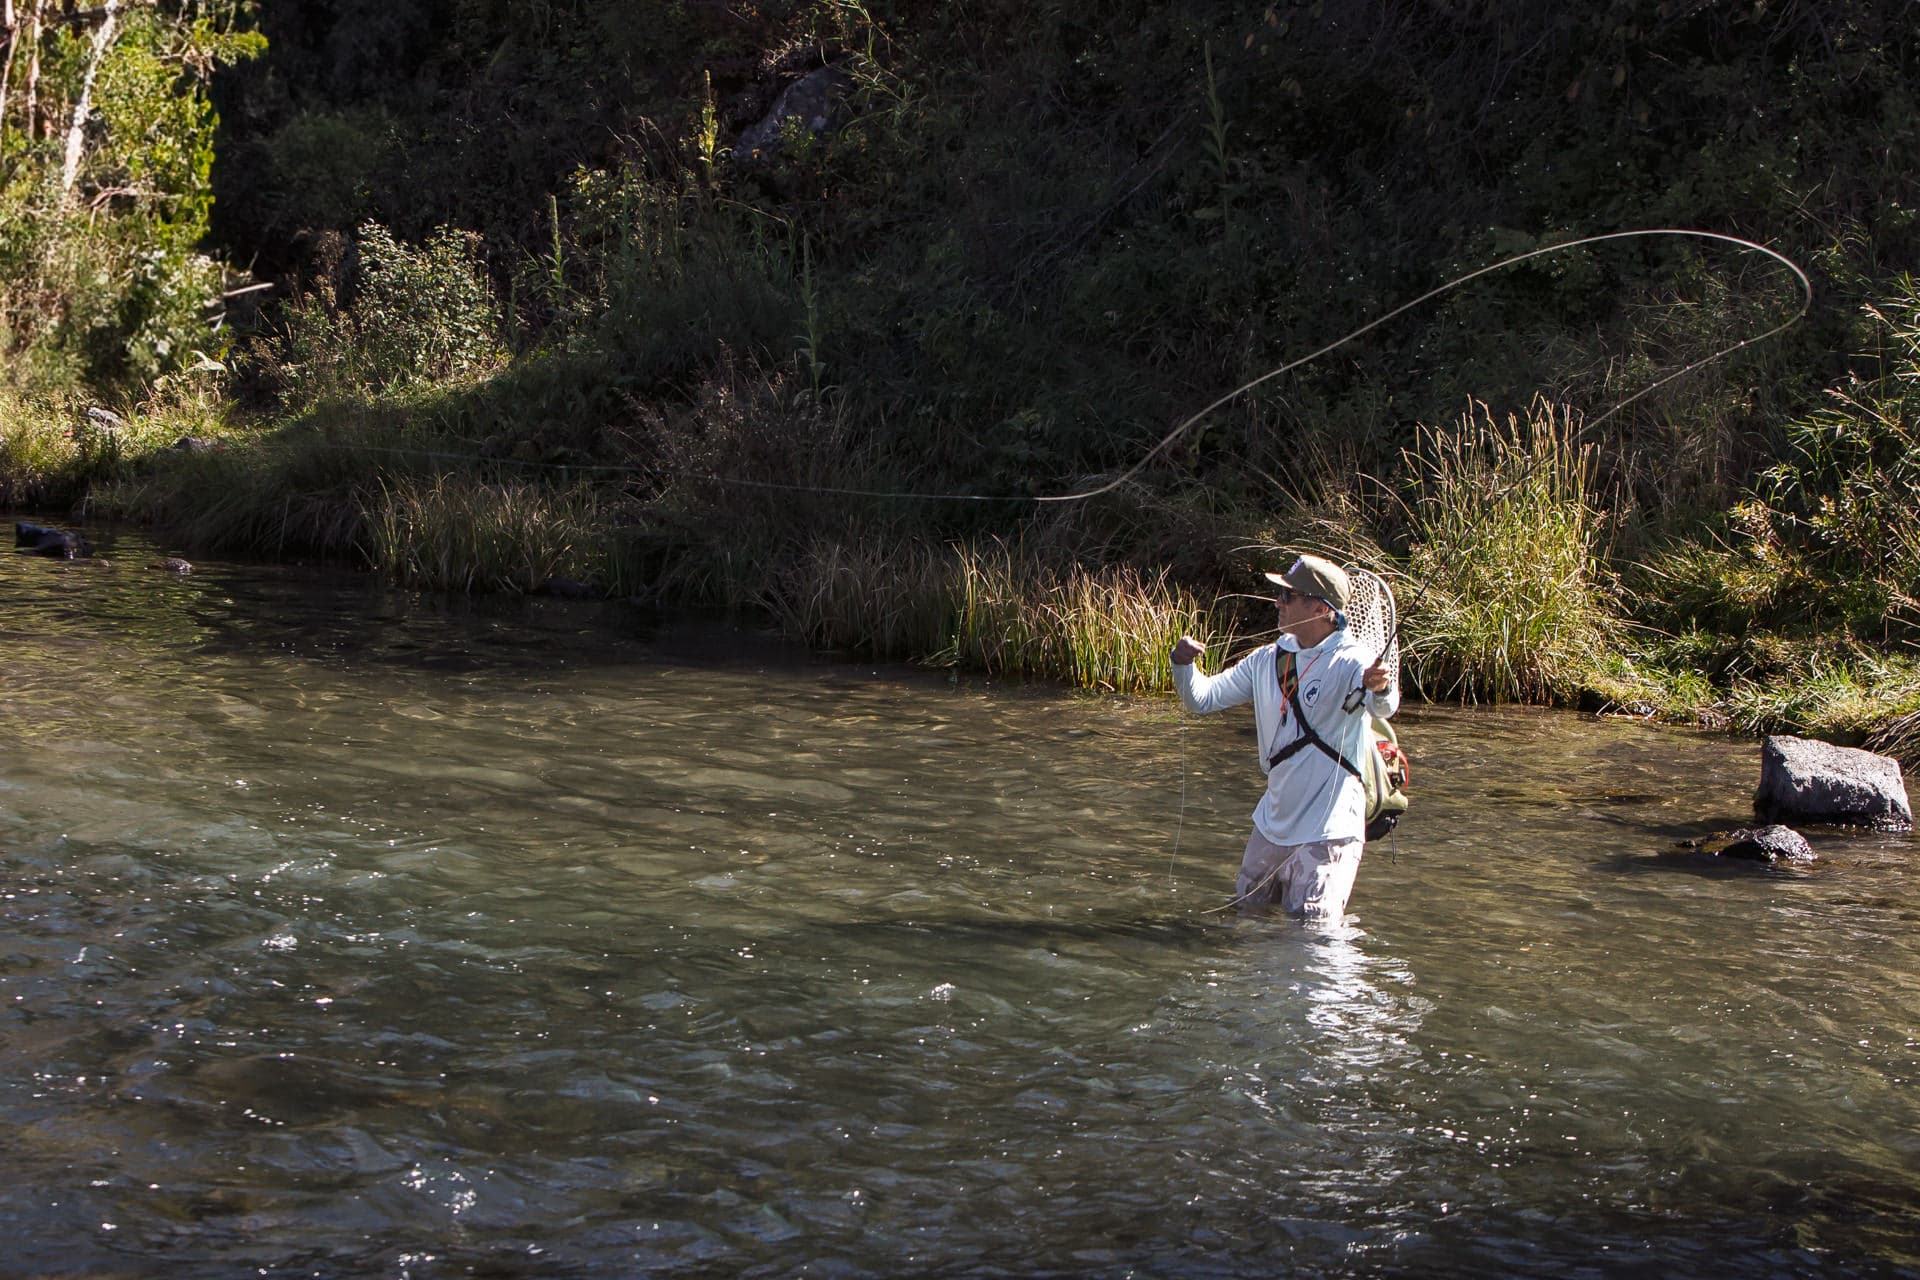 How to Choose a Fly Rod: A Complete Guide – Jackson Hole Fly Company